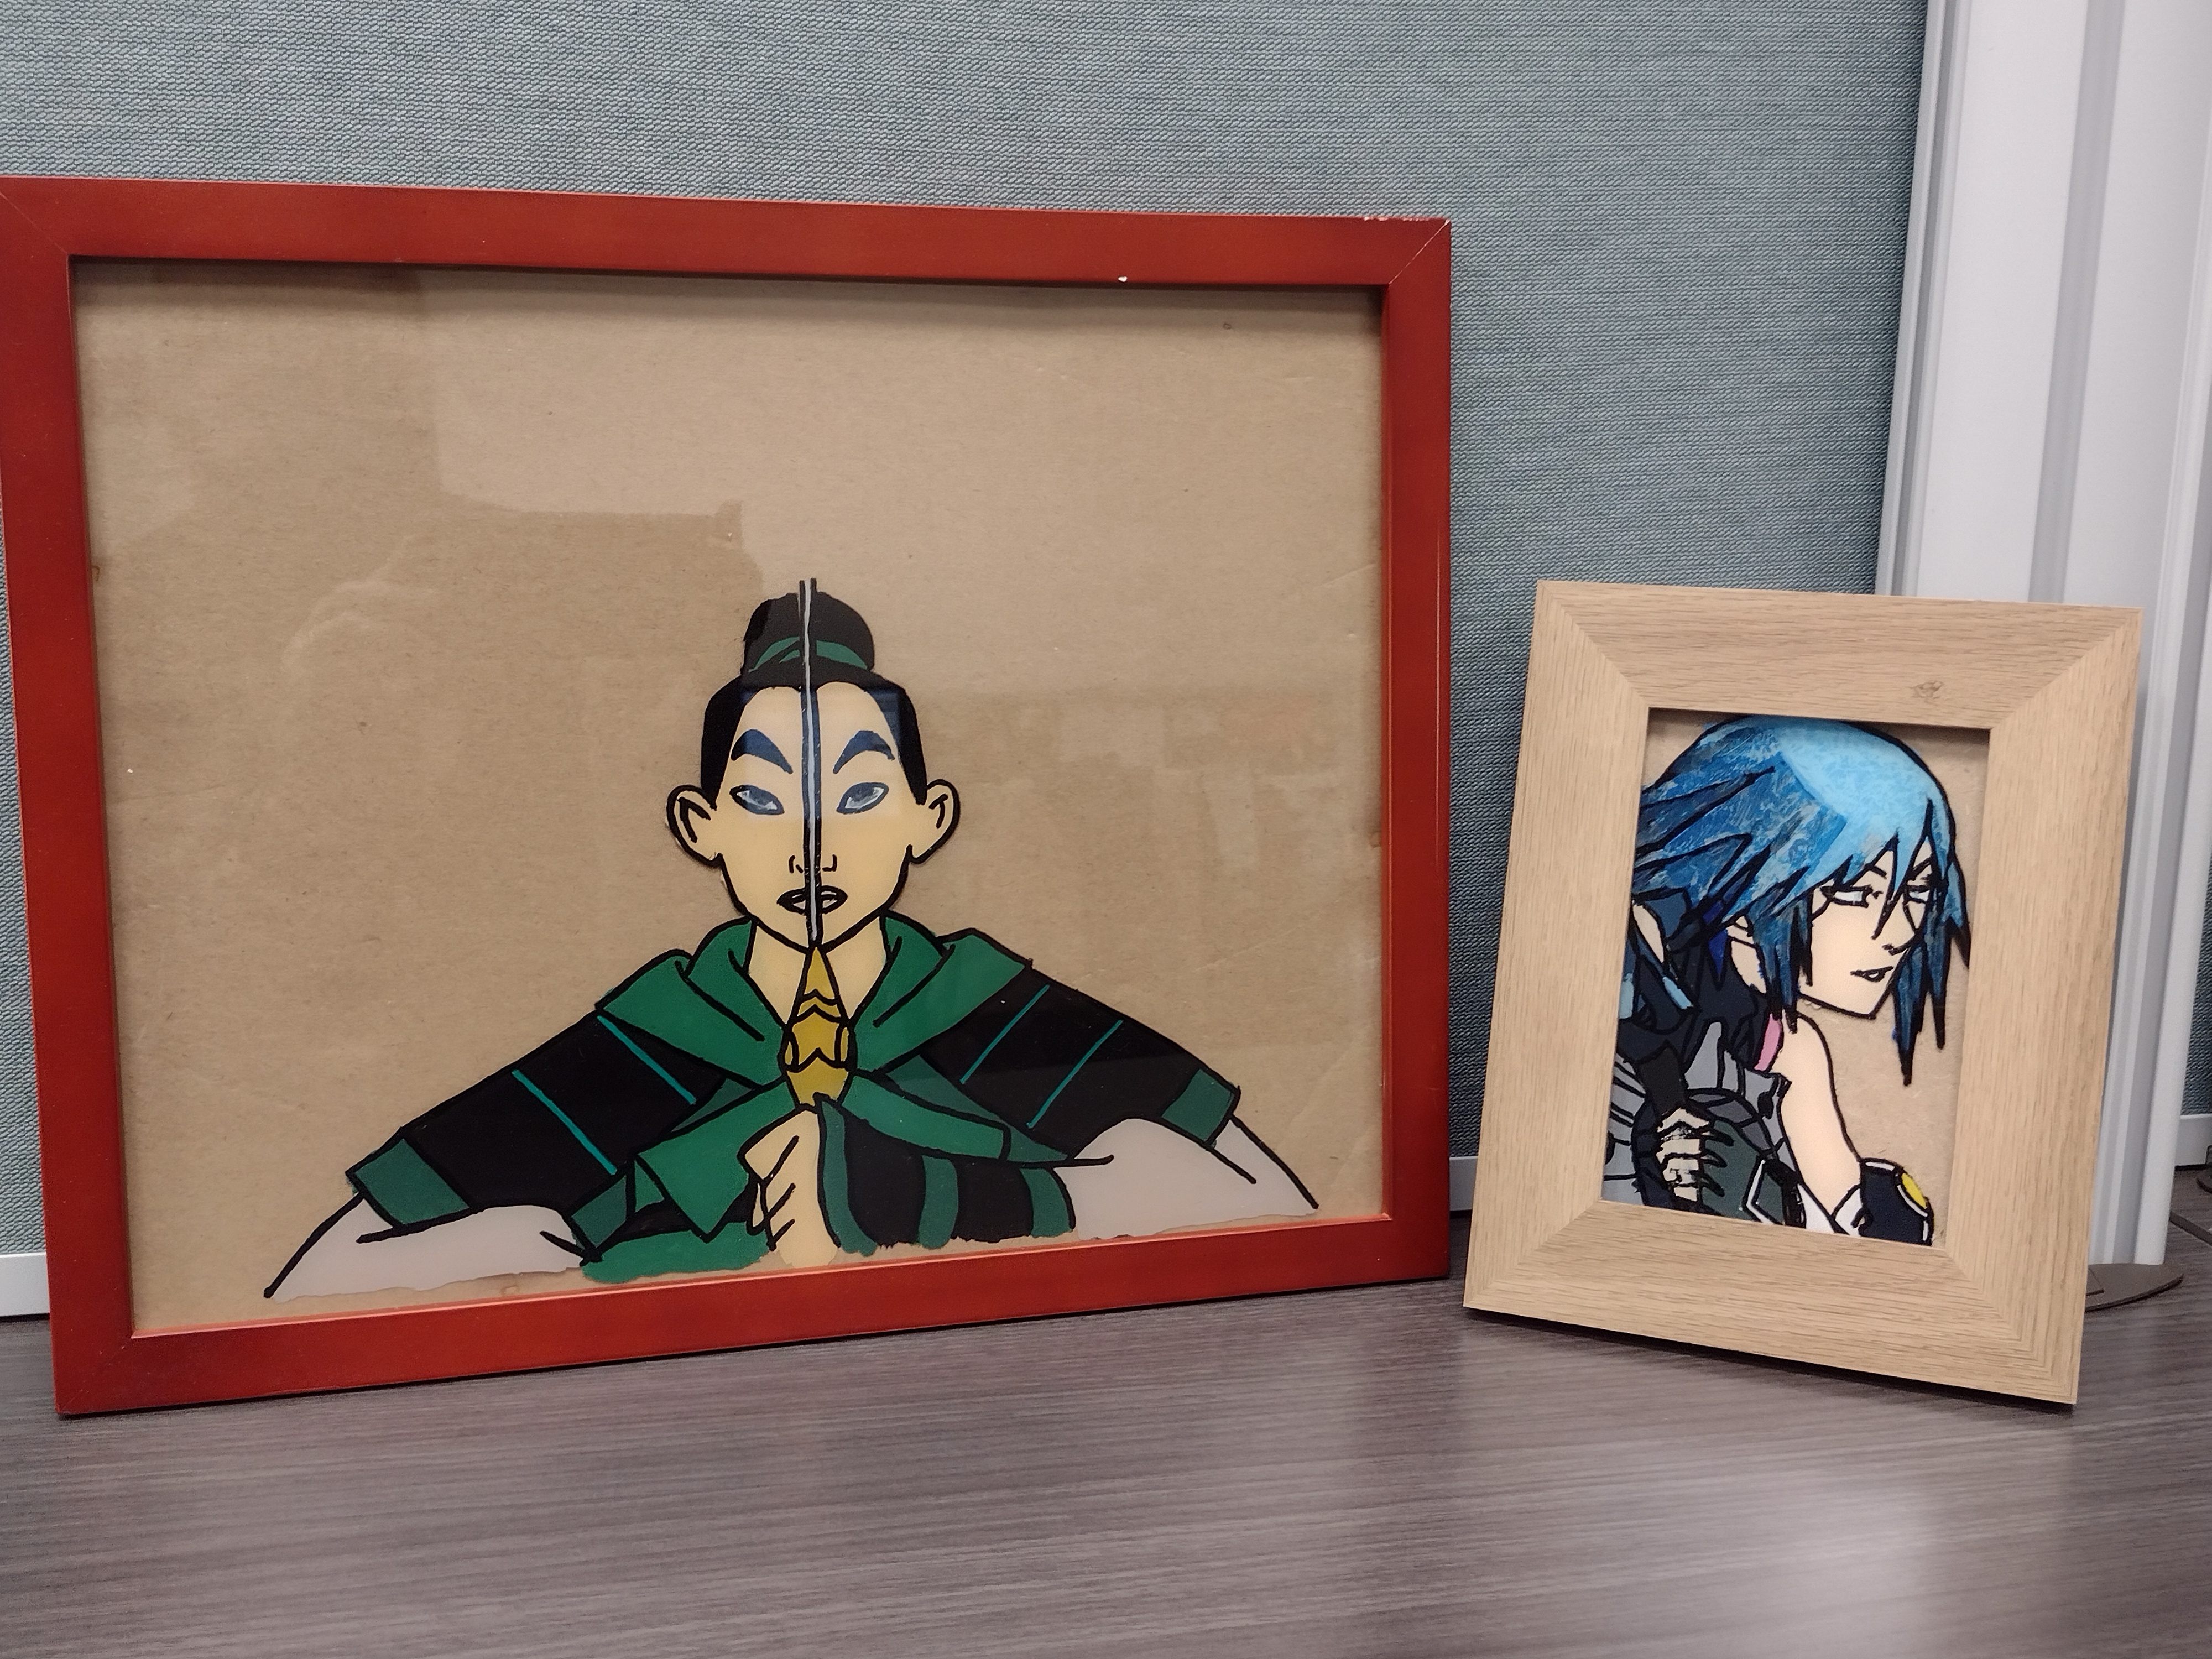 One large picture frame depicting a painted image of Disney's M<ulan holding a sword dressed in armor. Next to it is a smaller picture frame featuring a painting of Kingdom Hearts' Aqua.